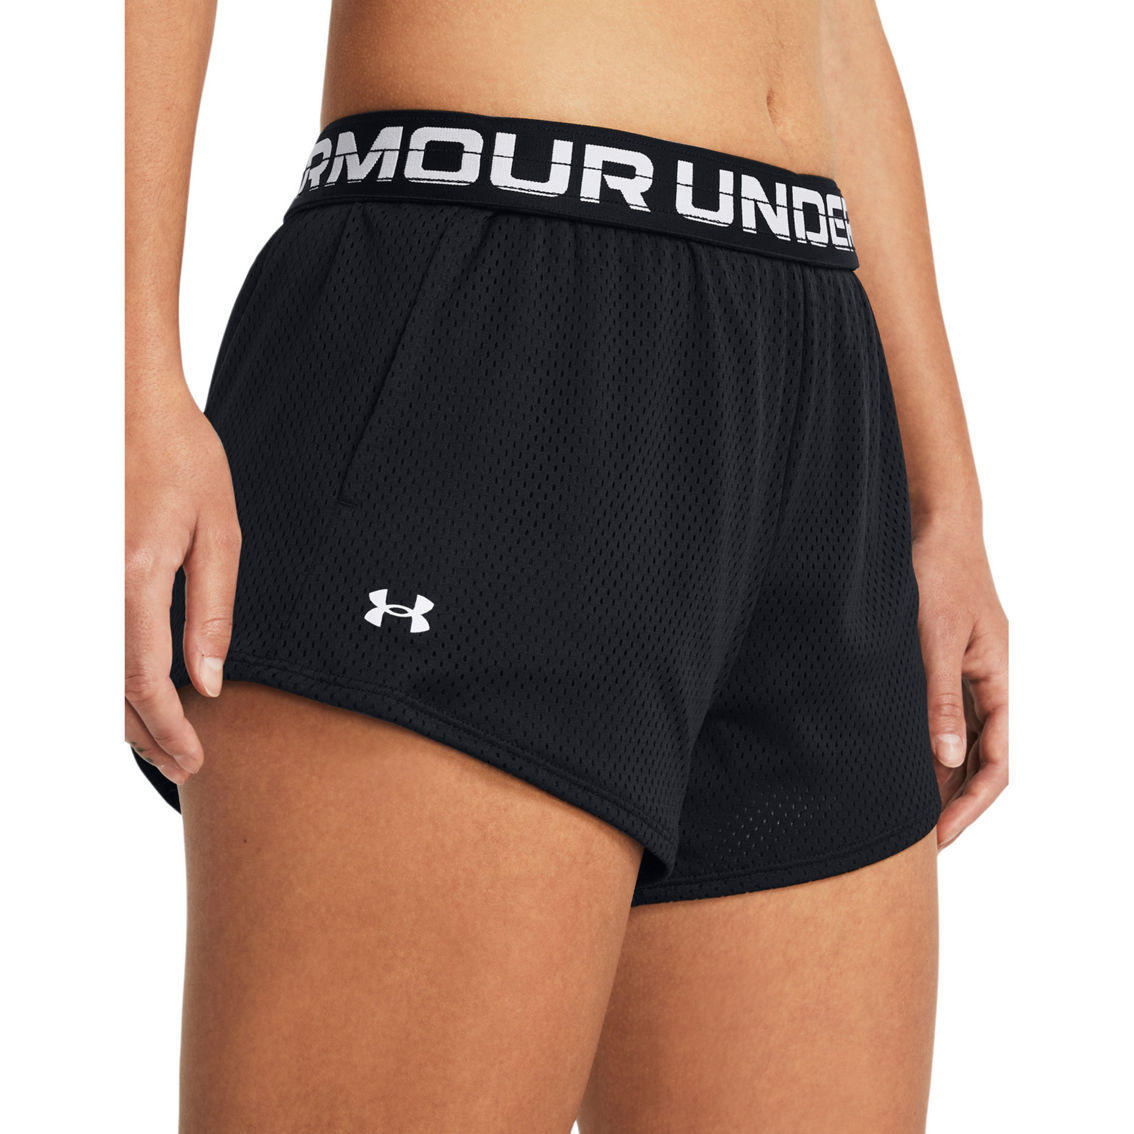 Under Armour Play Up Mesh Shorts - Image 4 of 6